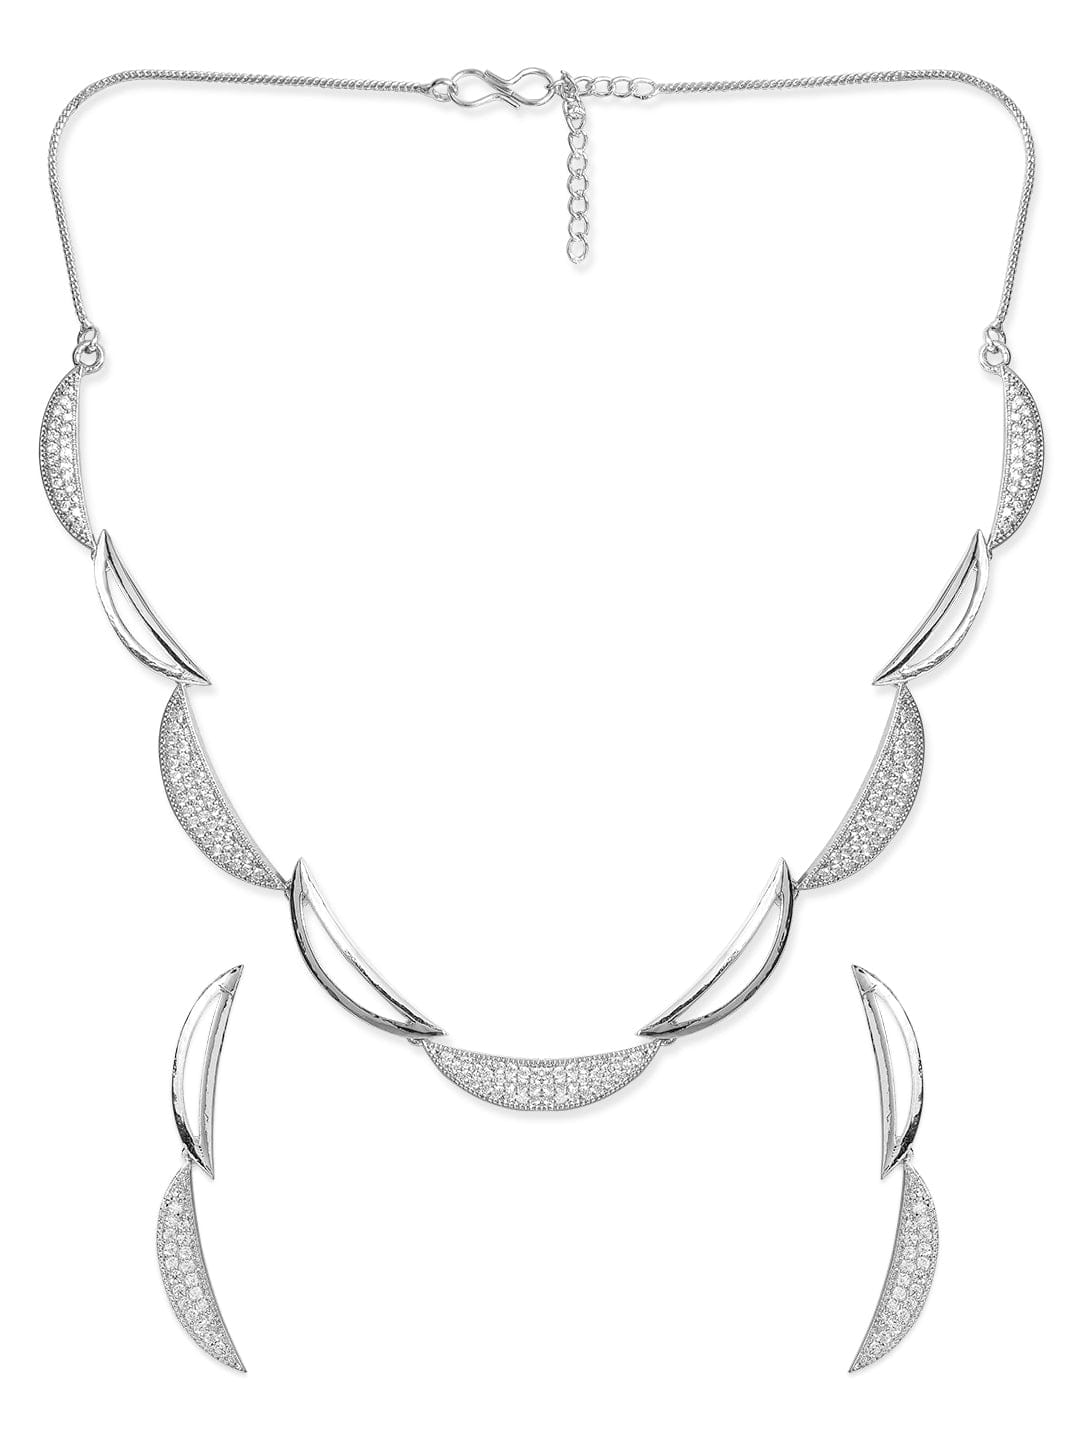 Rubans Silver Plated Zirconia Stone Studded Cresent Moon Shaped Necklace Set. Necklace Set